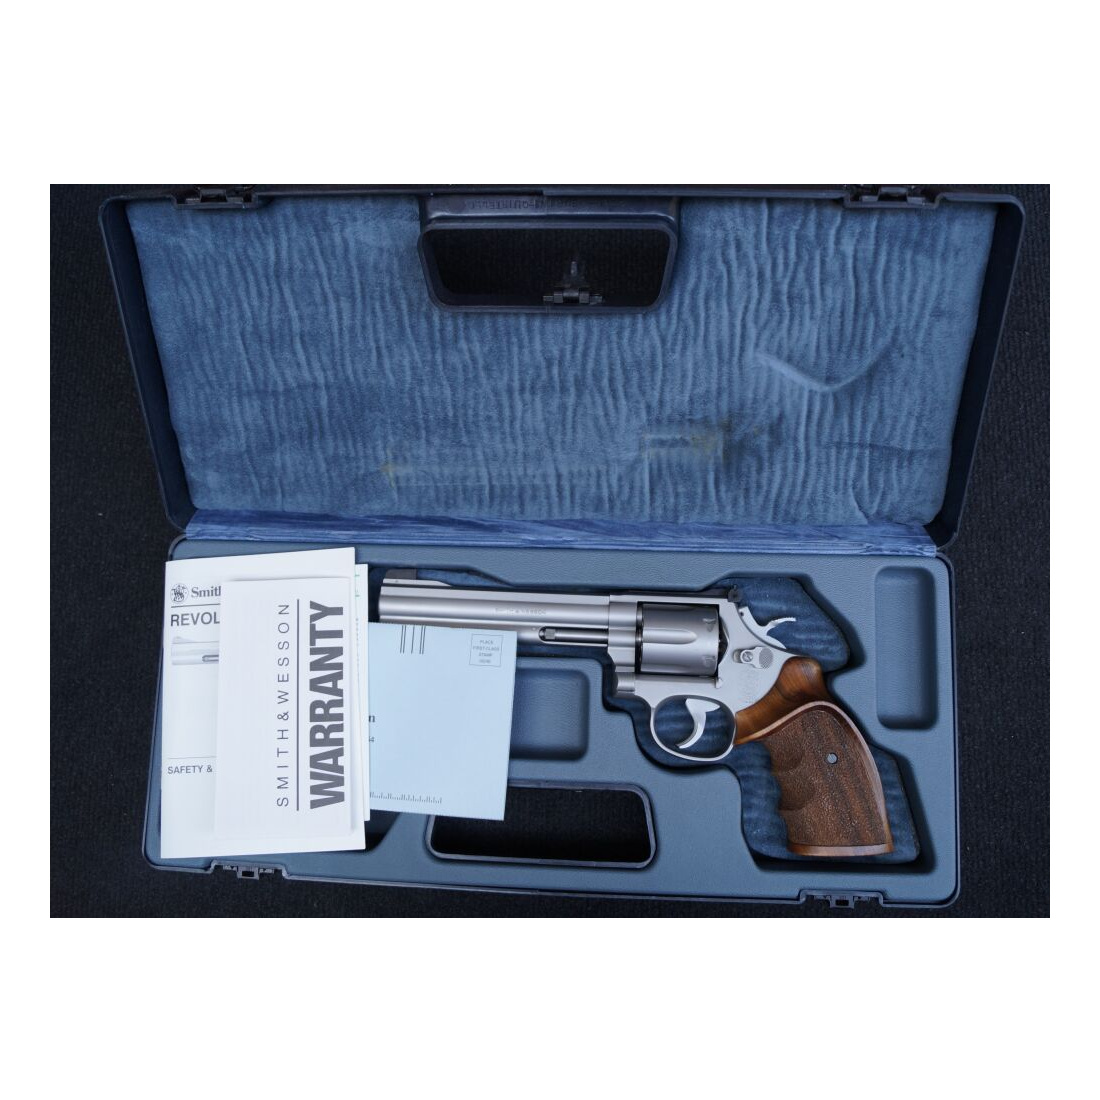 Smith & Wesson	 686 - 4  Target Champion